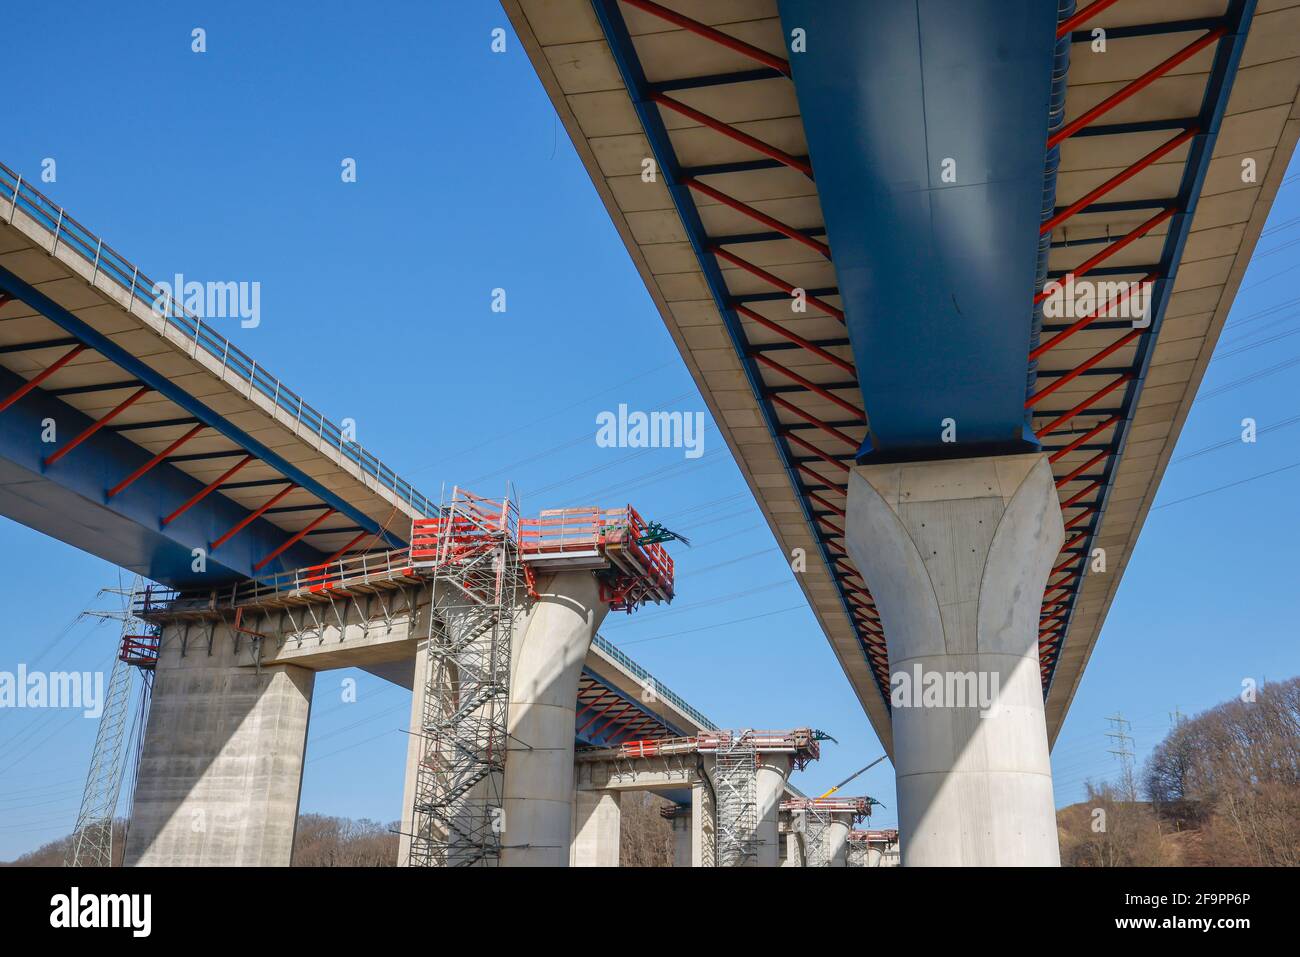 24.02.2021, Hagen, North Rhine-Westphalia, Germany - New construction of A45 freeway bridge Lennetal, the 1000m long Lennetal bridge is moved from the Stock Photo